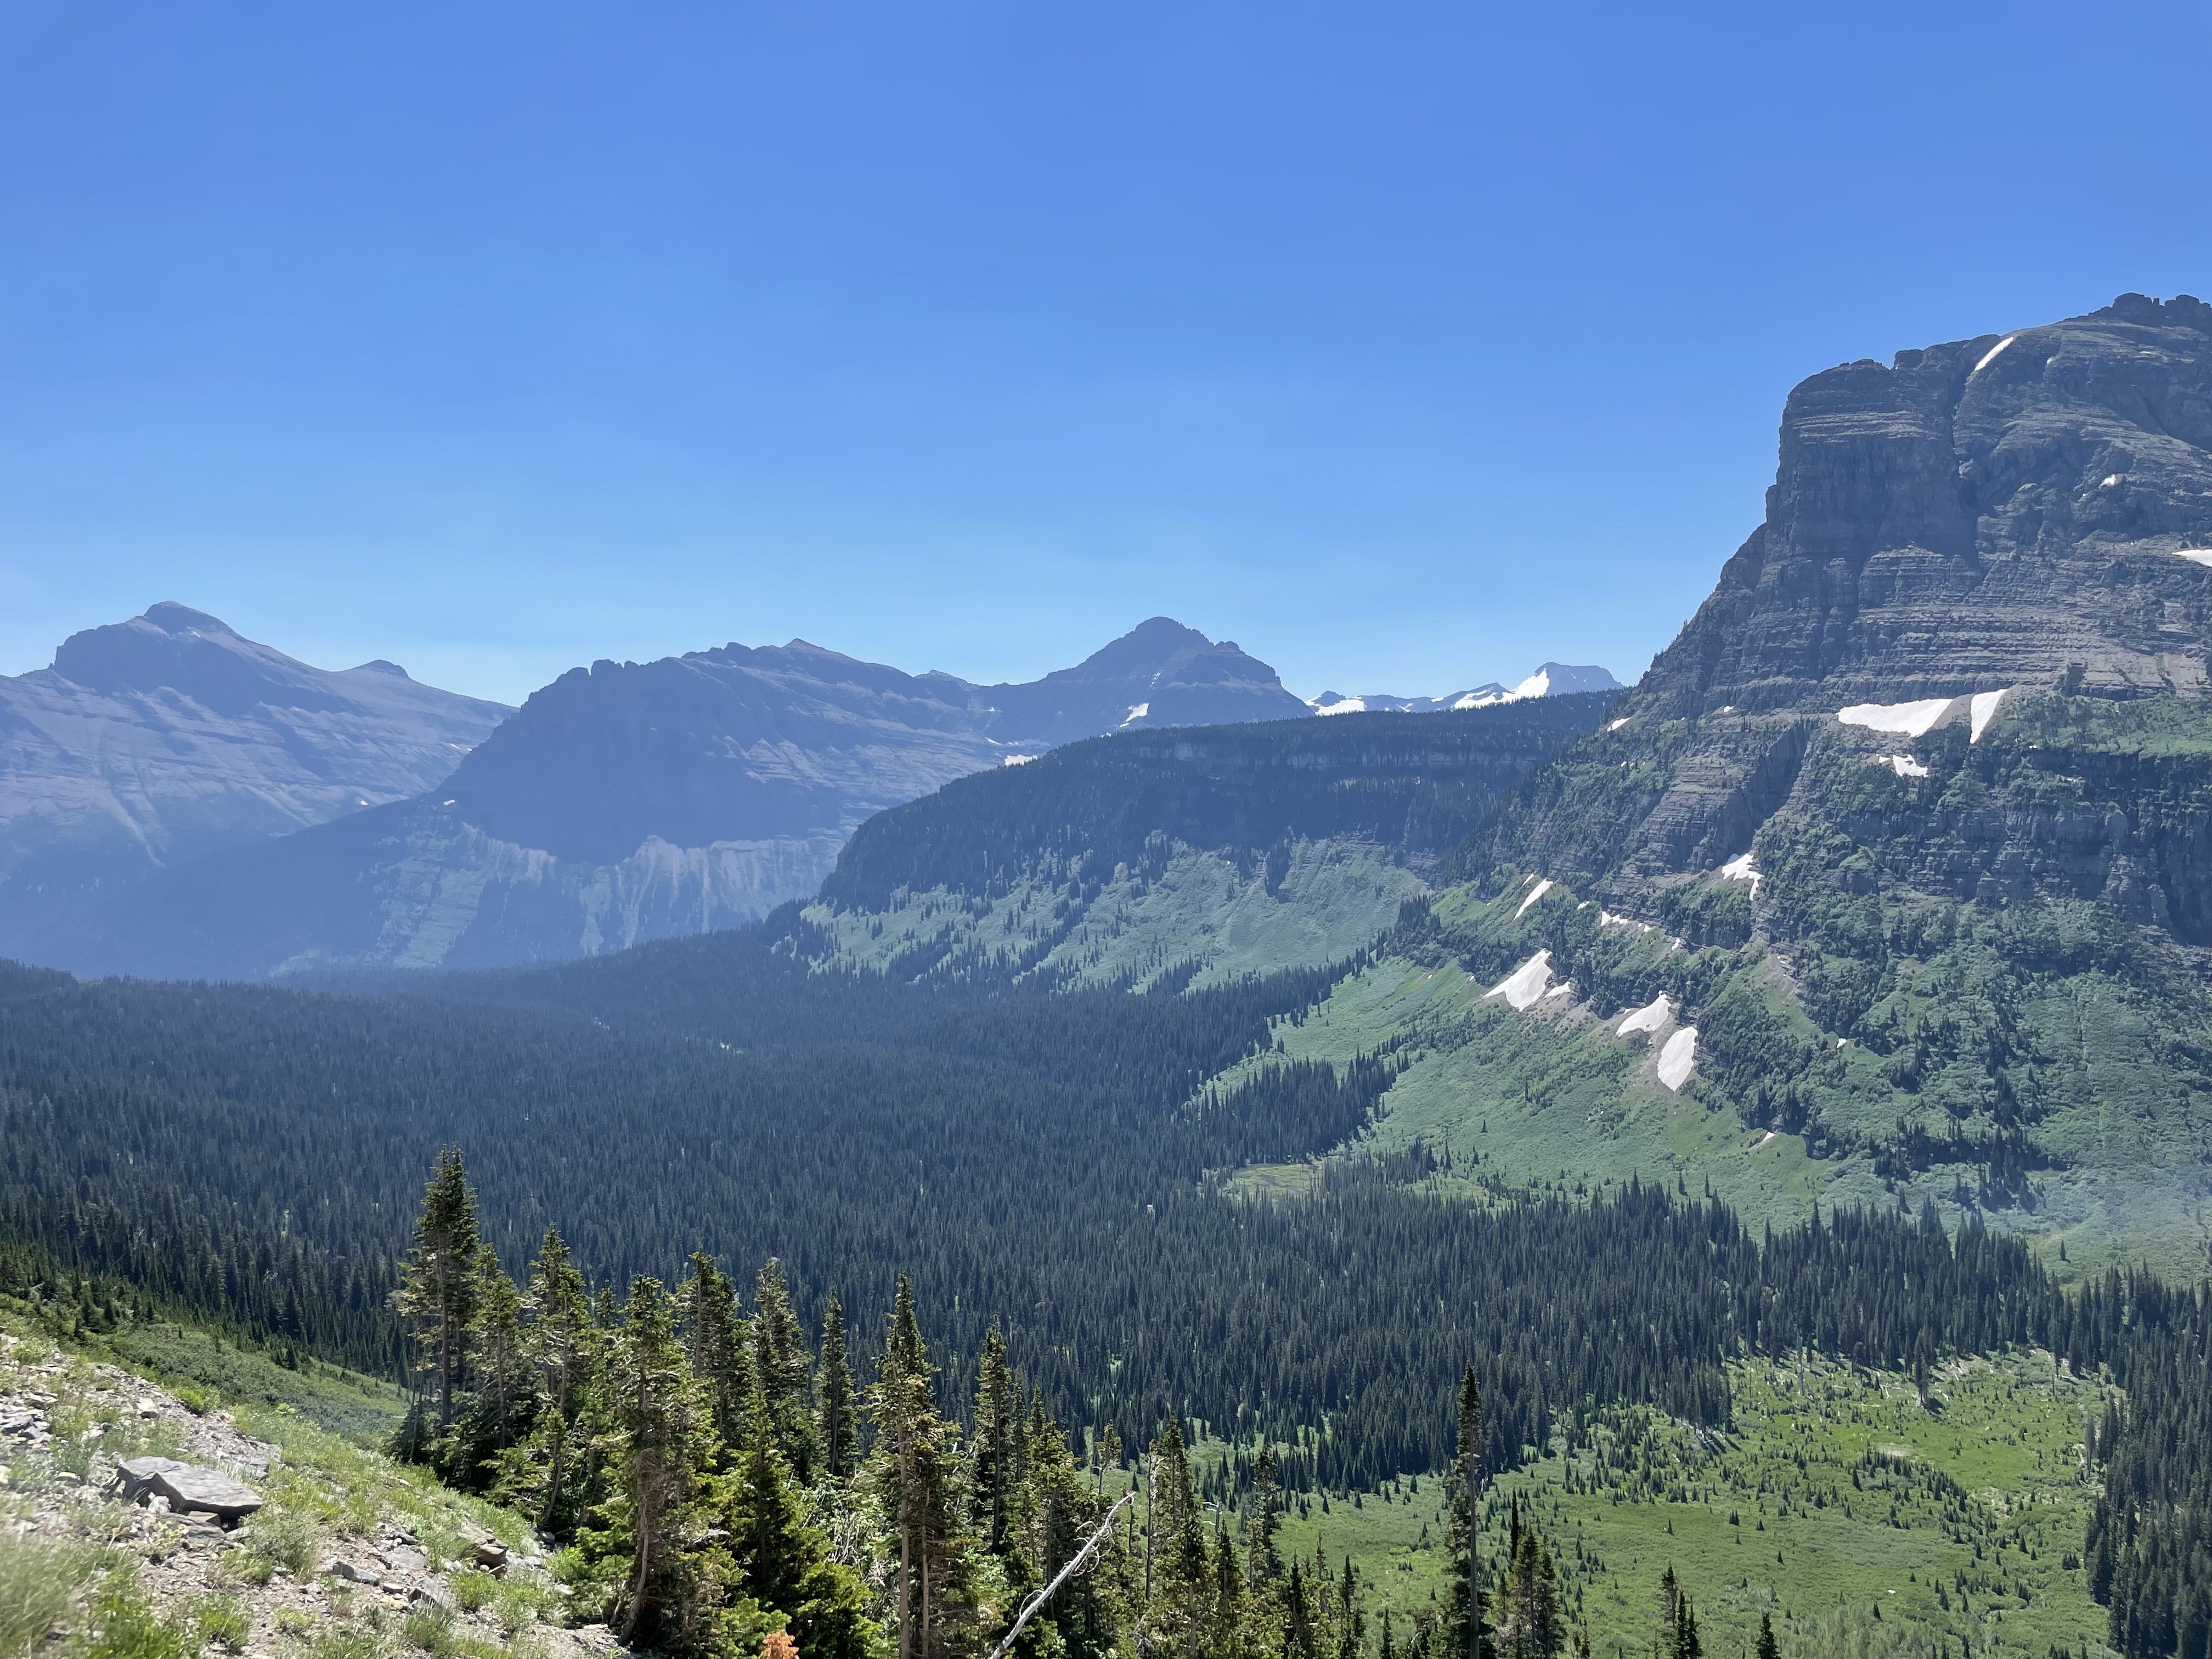 A Hassle-Free Guide To Visiting Glacier National Park This Summer